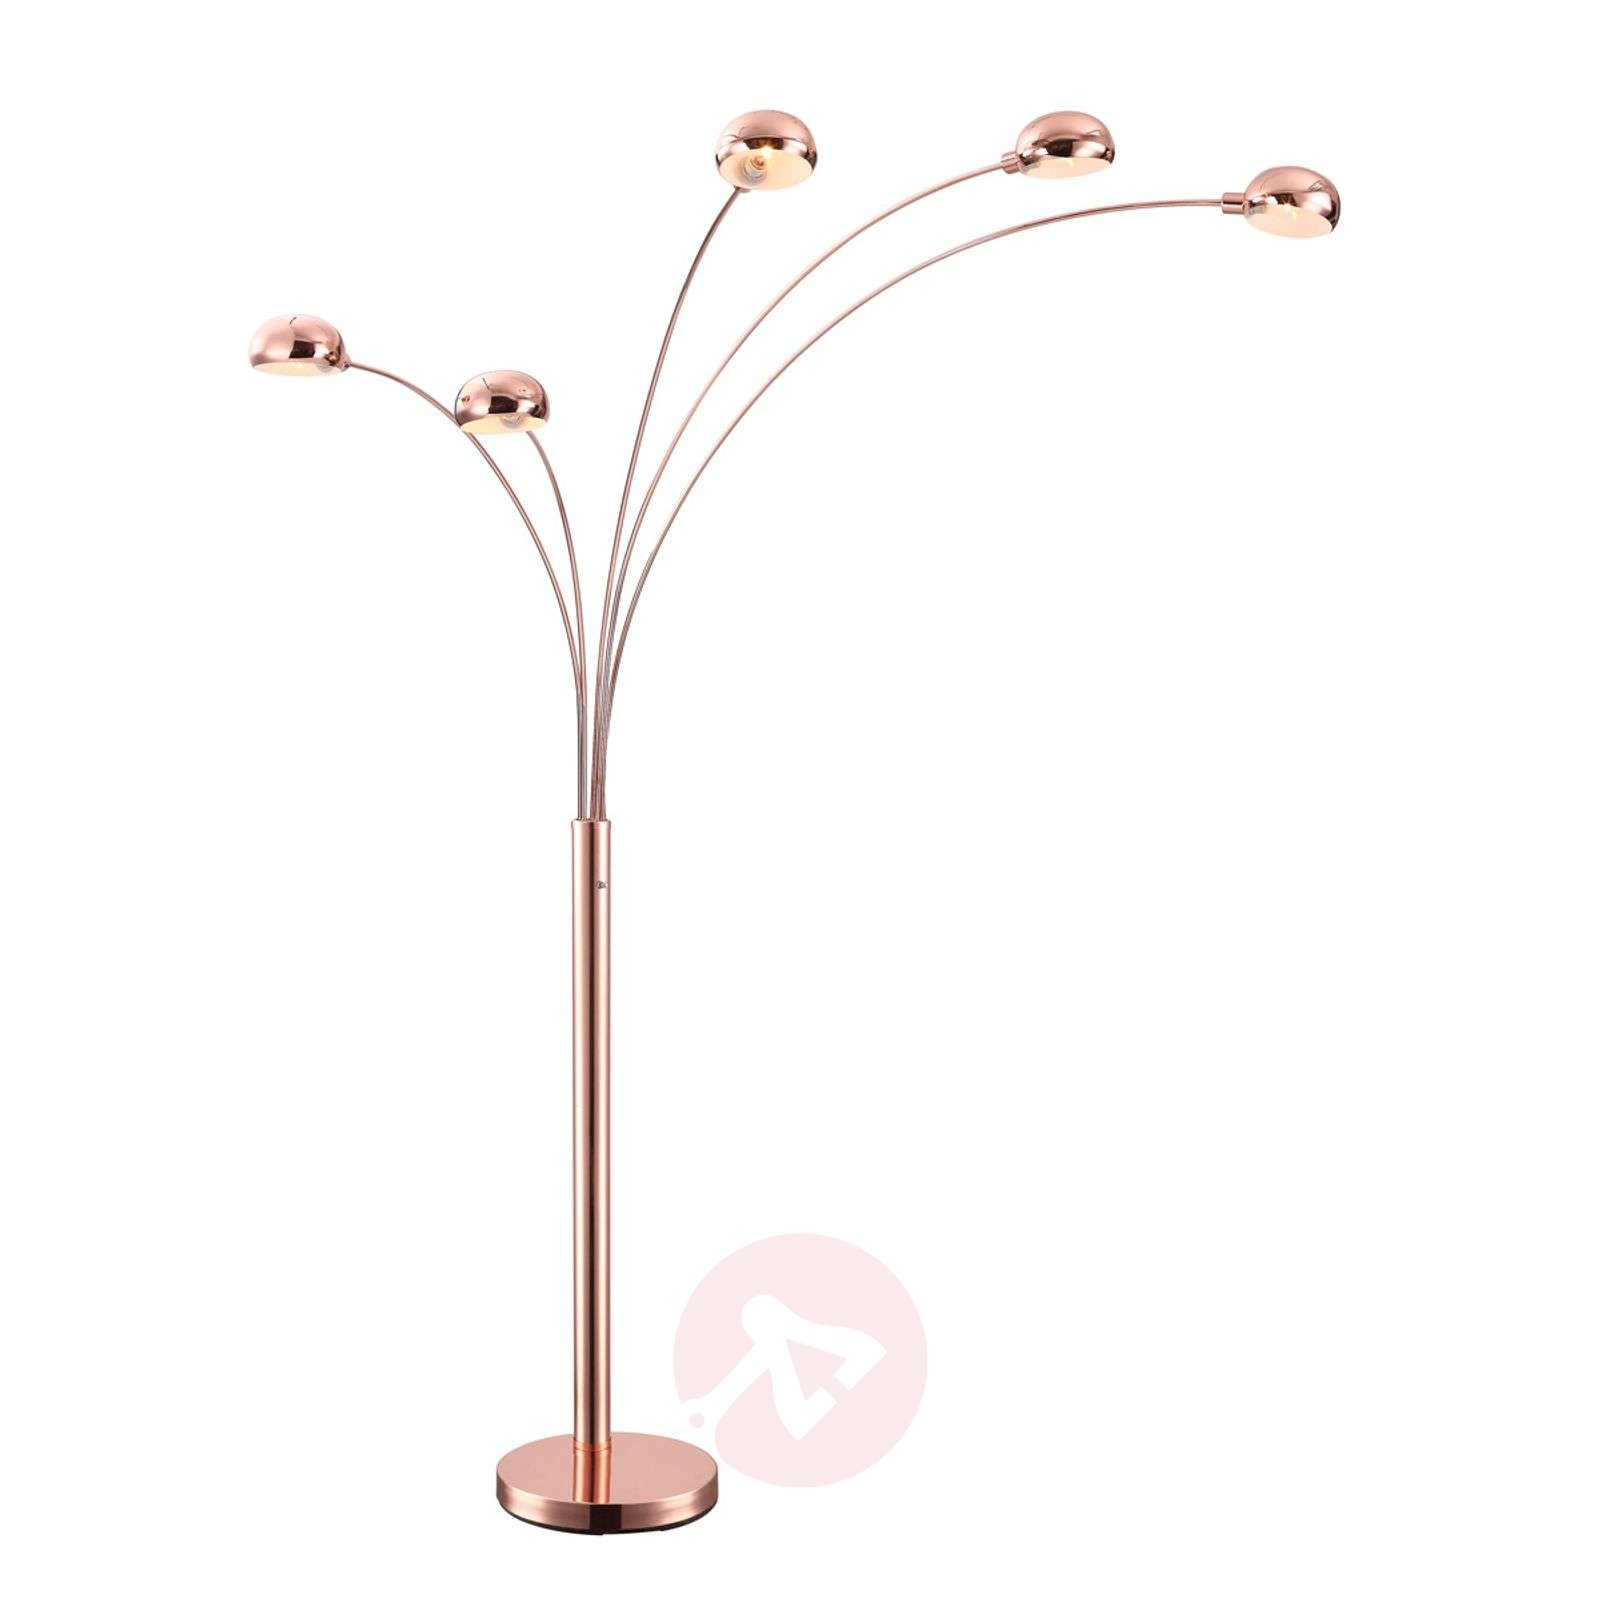 5 Bulb Pelin Floor Lamp Copper Coloured Shades throughout proportions 1600 X 1600